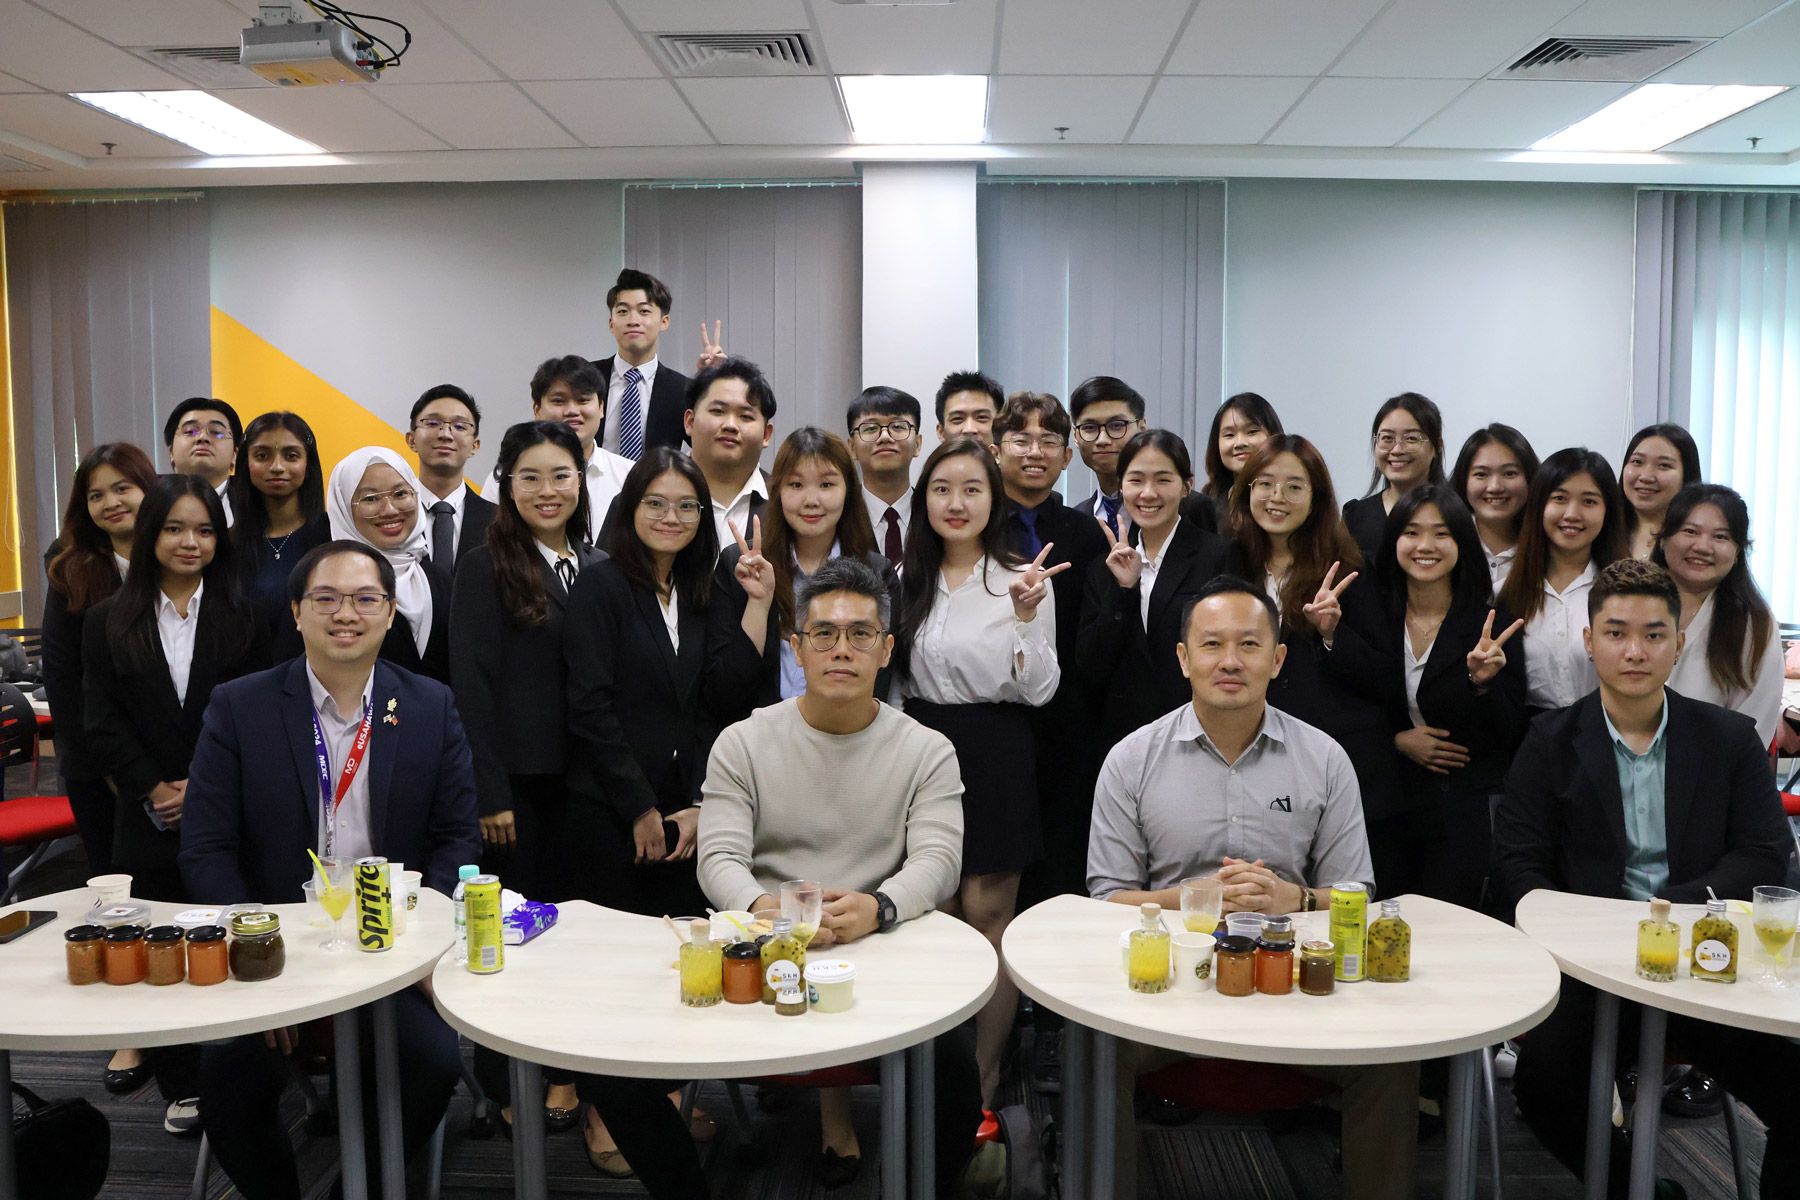 Swinburne Sarawak Business Consulting Project students shine in passionfruit commercialisation showcase